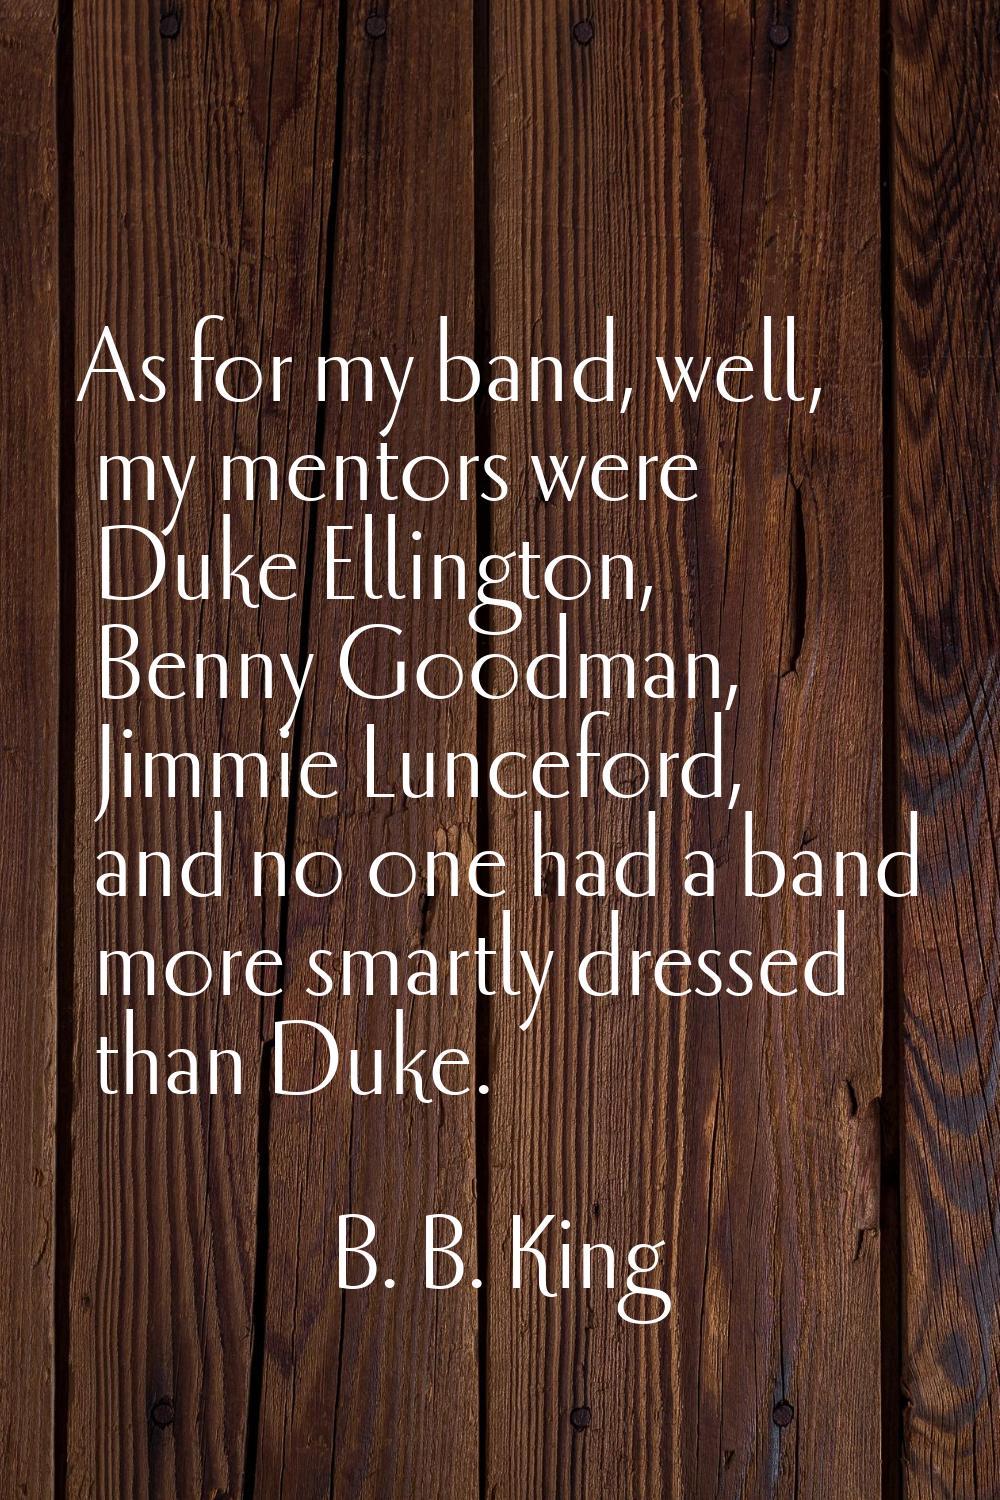 As for my band, well, my mentors were Duke Ellington, Benny Goodman, Jimmie Lunceford, and no one h